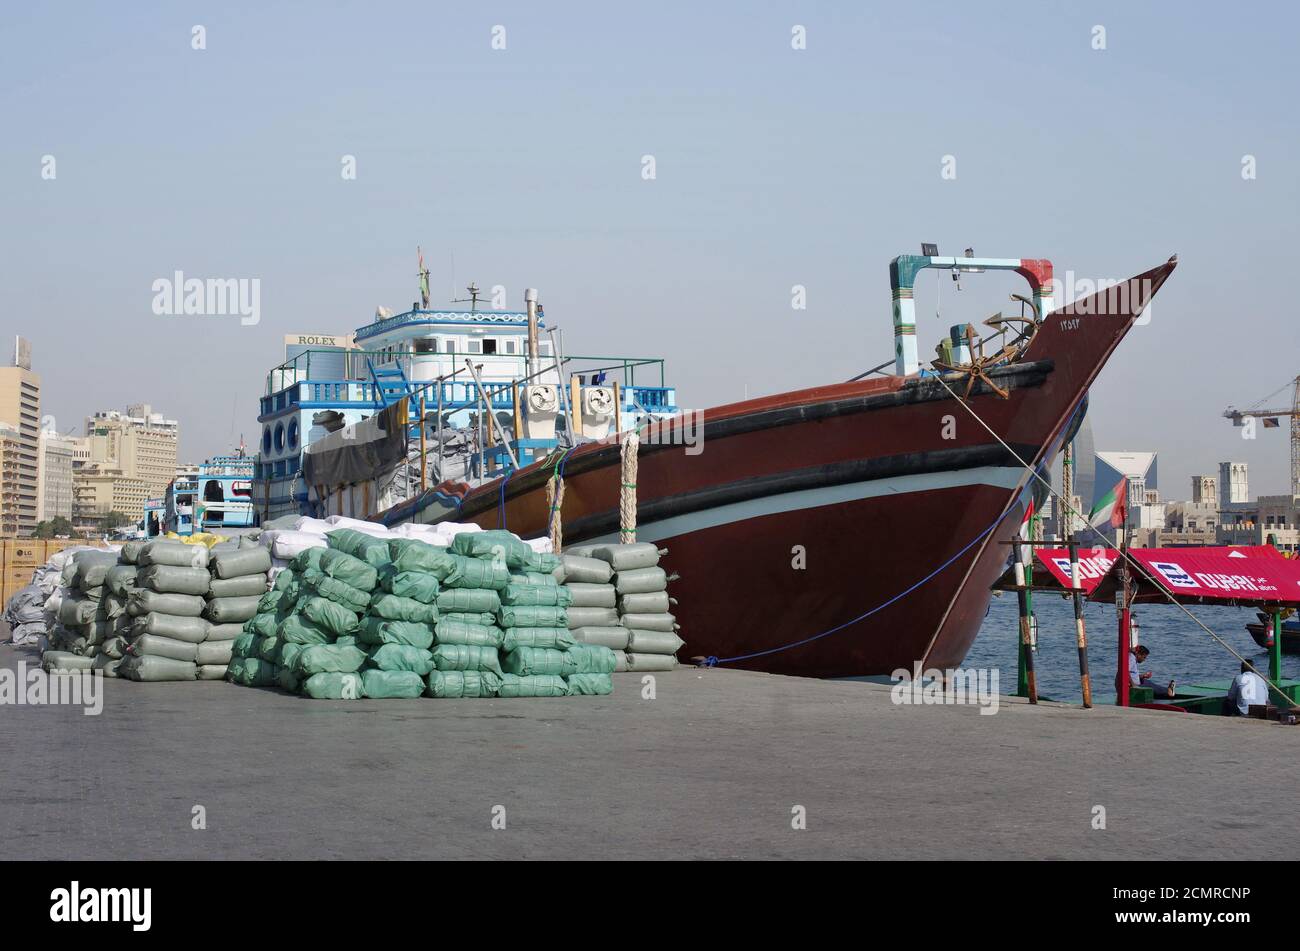 A small private no name merchant ship unloads bags with cotton on the berth. Stock Photo